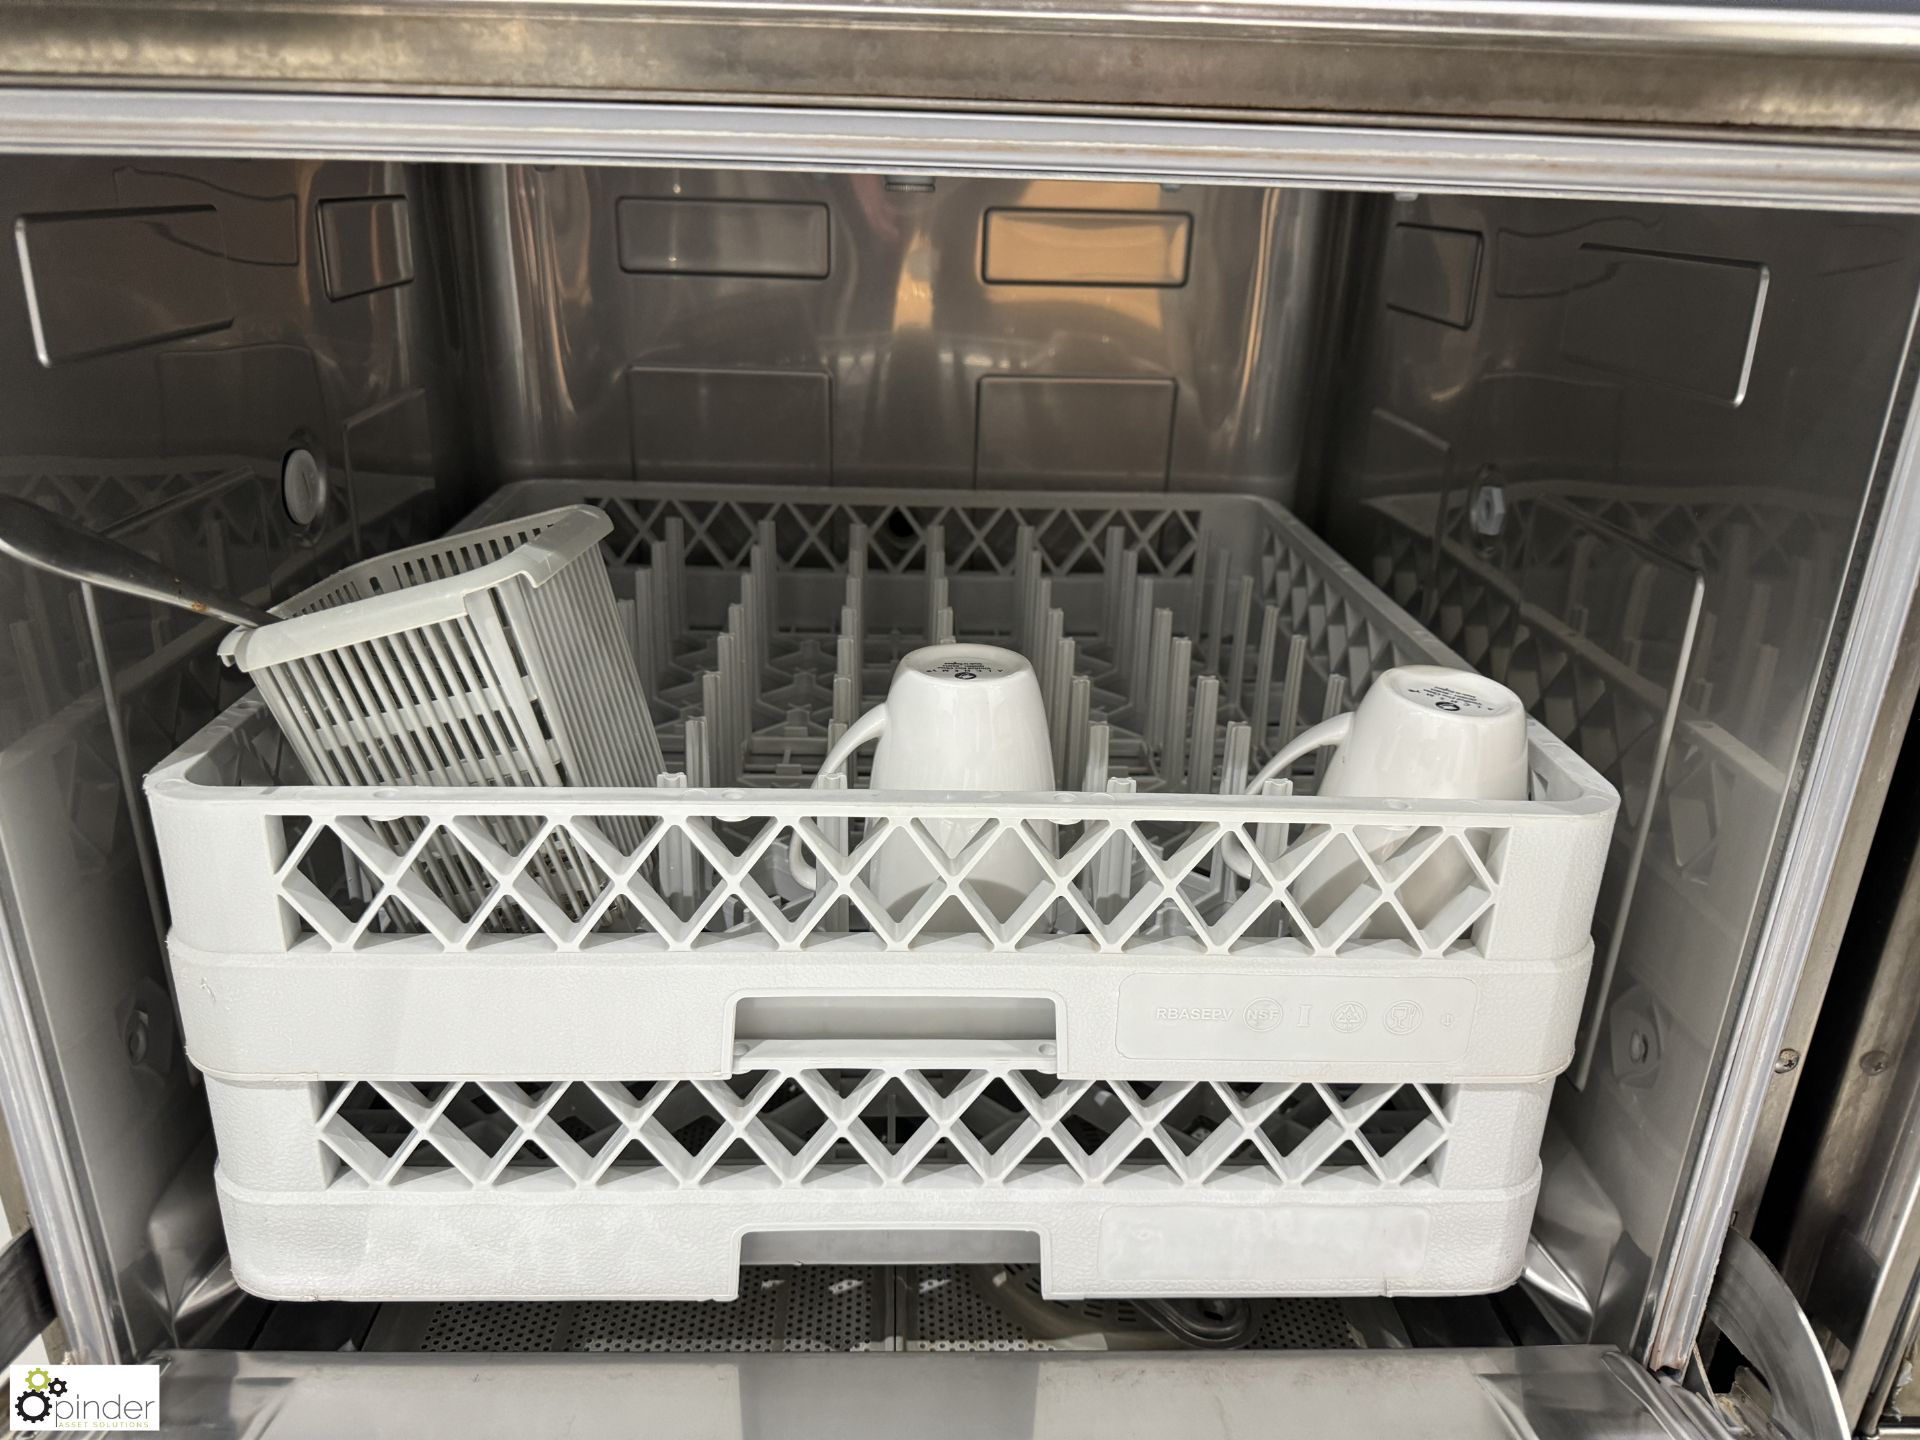 Maidaid D515 stainless steel under counter single tray Dishwasher, 240volts (location in - Image 2 of 3